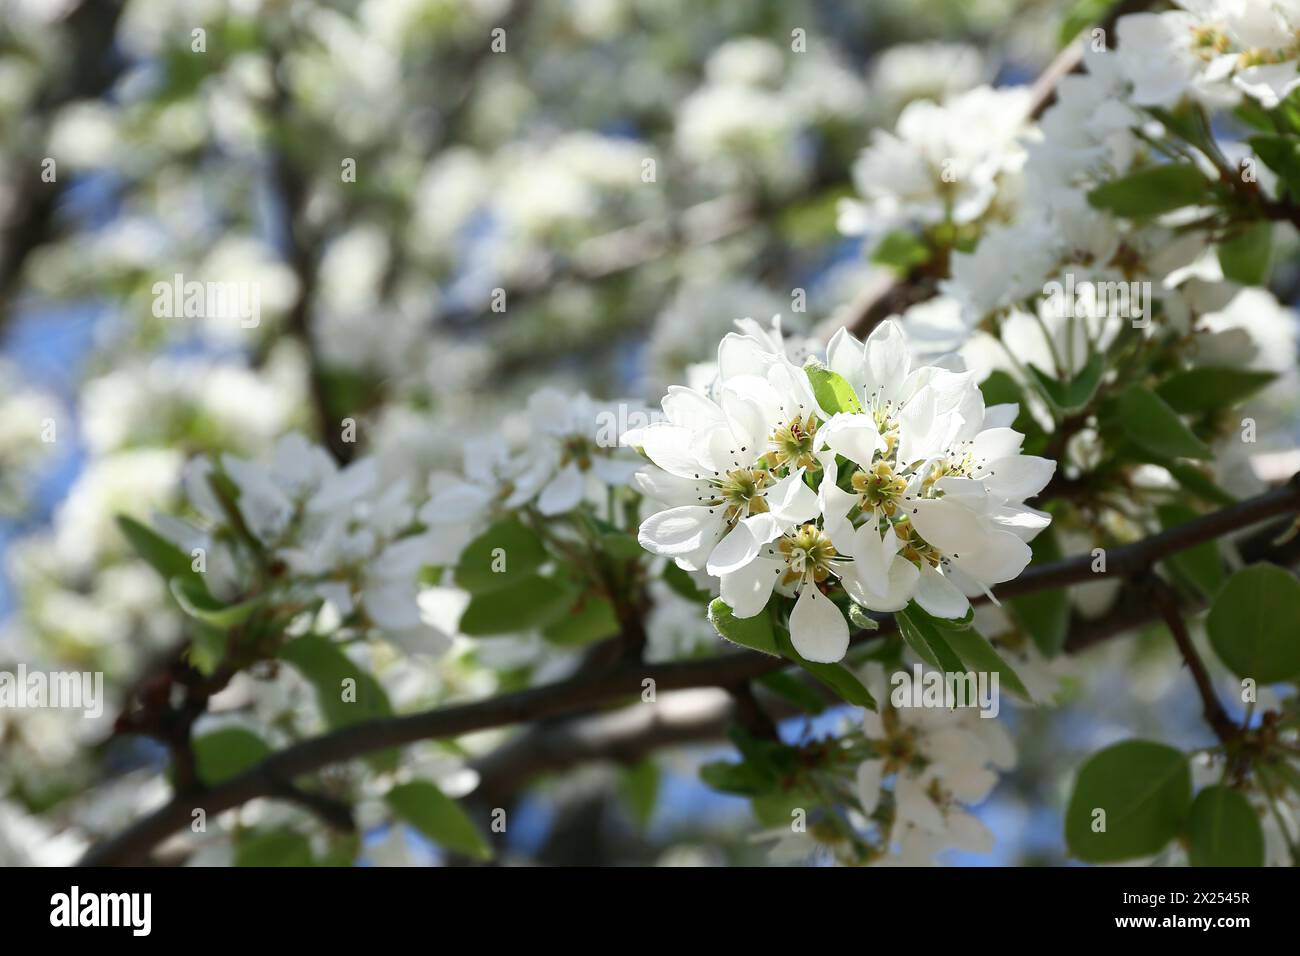 Cherry blossoms over blurred nature background. Closeup Stock Photo